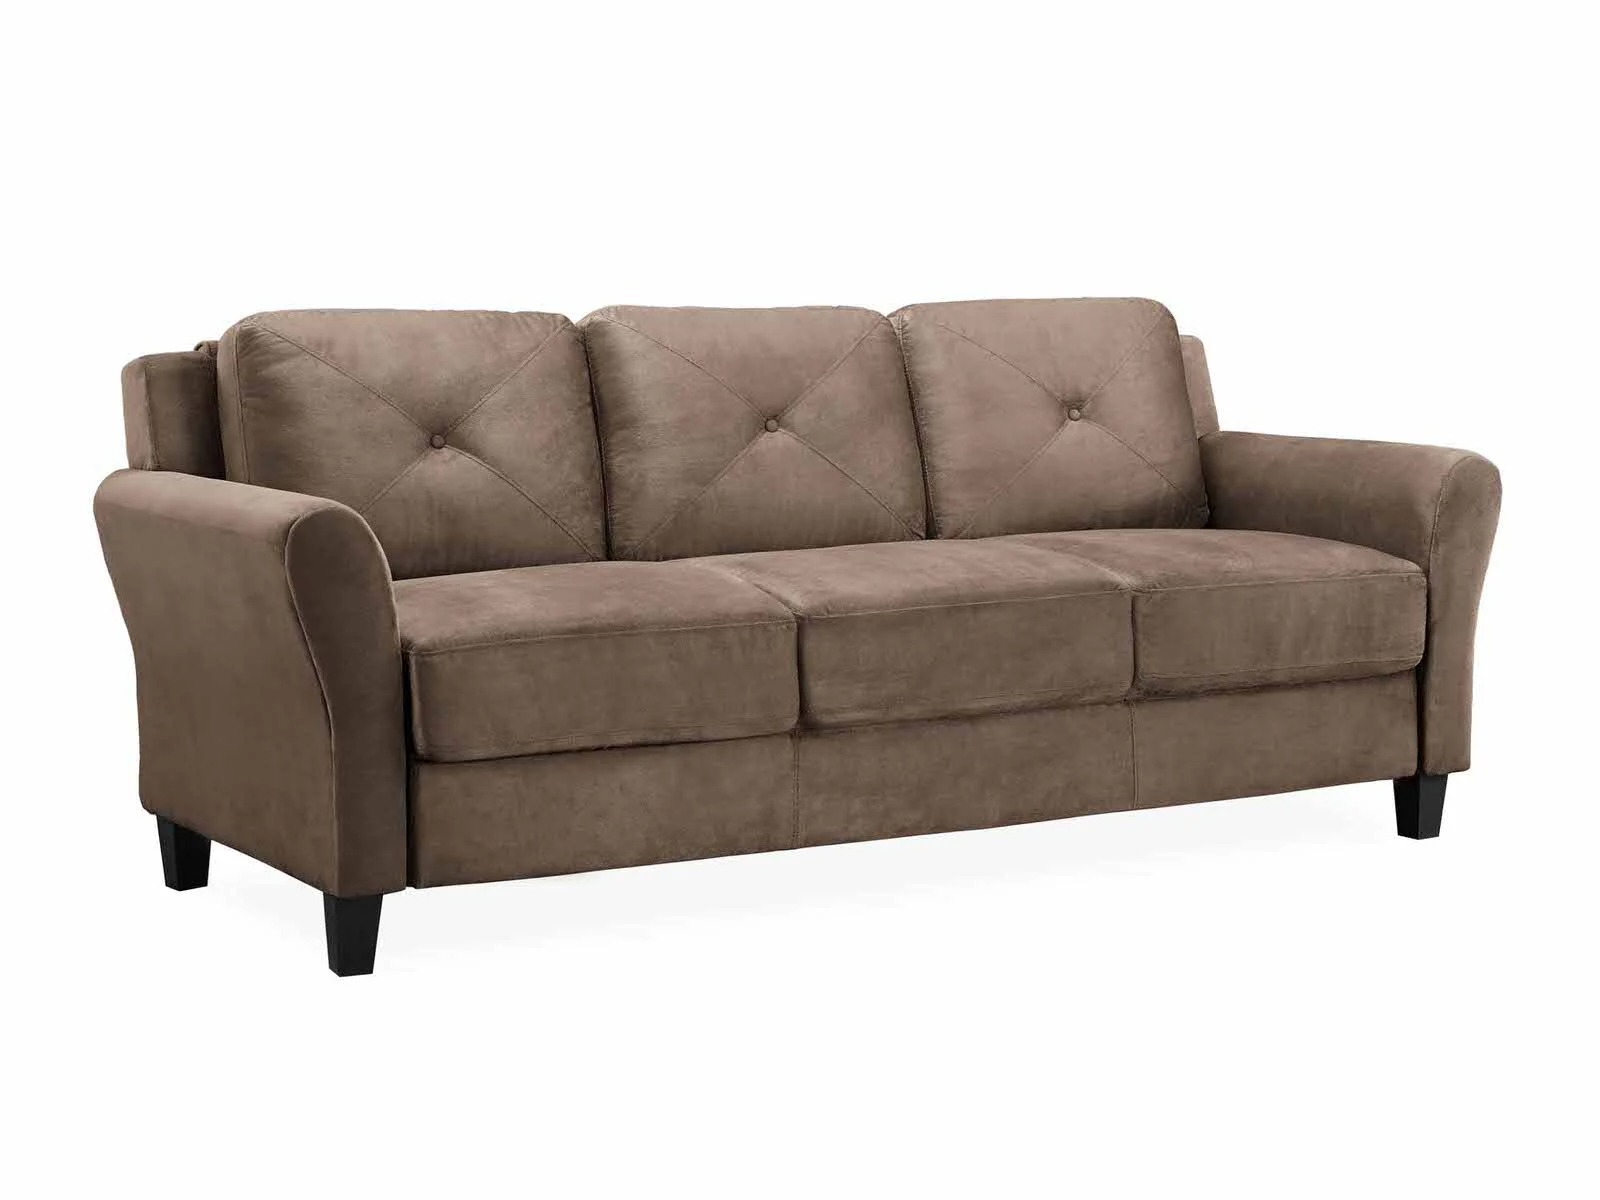 Hartford Microfiber 3 Seat Sofa With Curved Arms-0